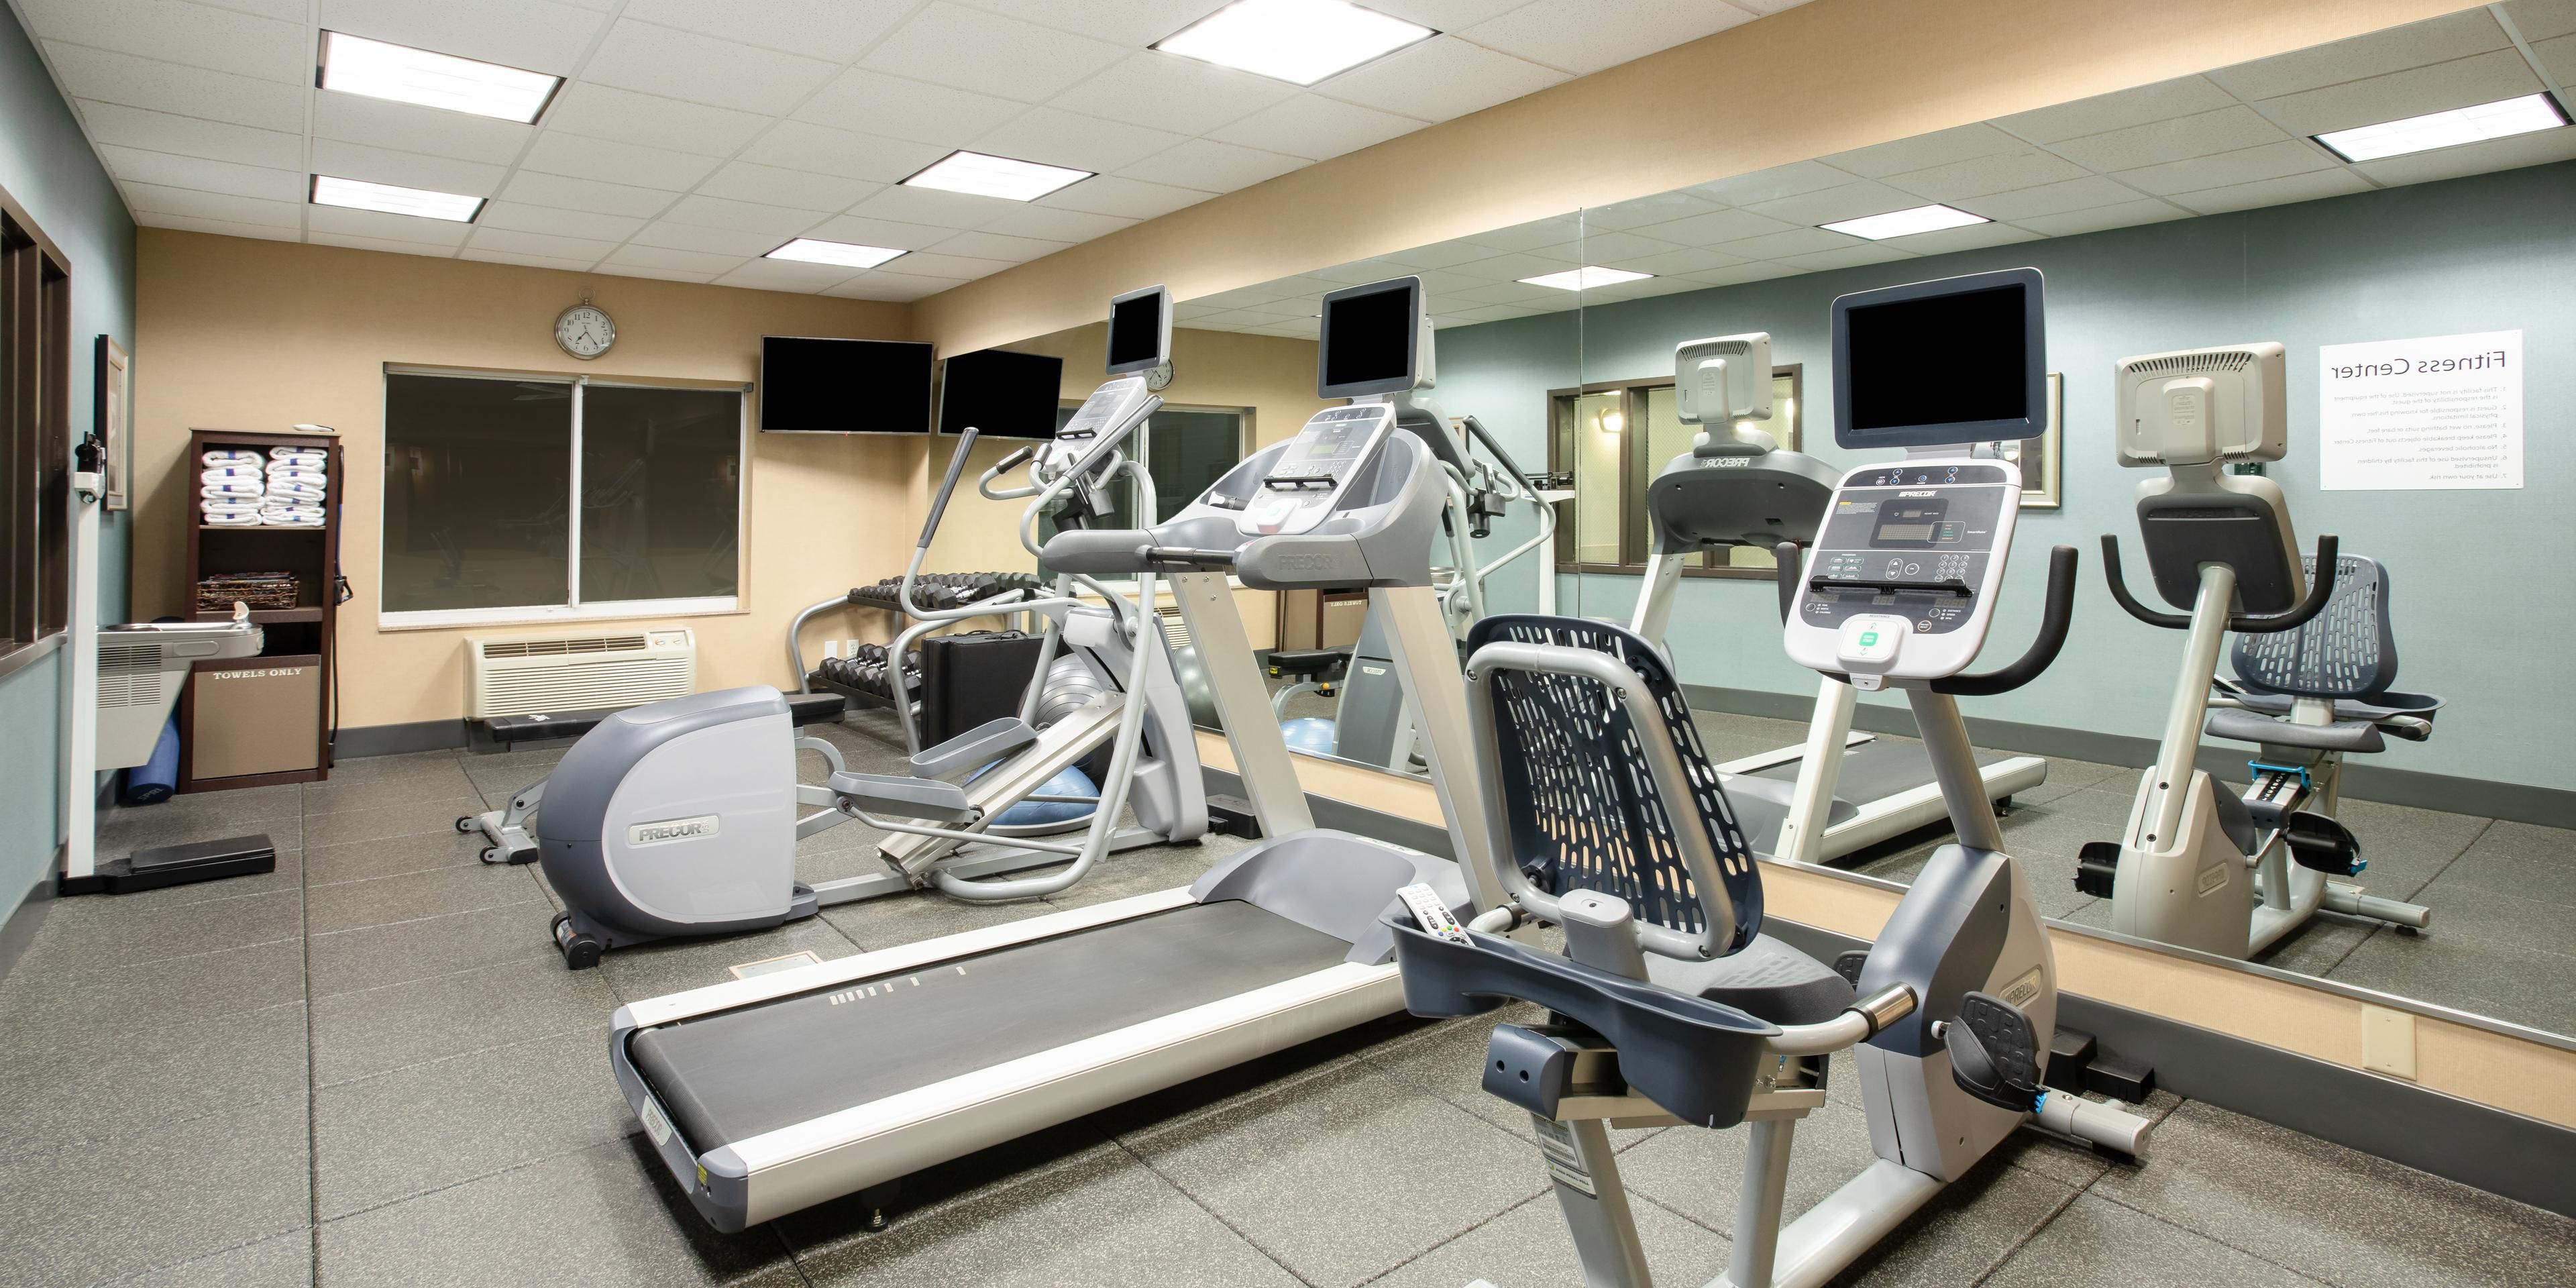 Take advantage of our 24 Hour Fitness Center featuring PRECOR Fitness Equipment, free weights, a bosu and stability ball, and exercise bands.